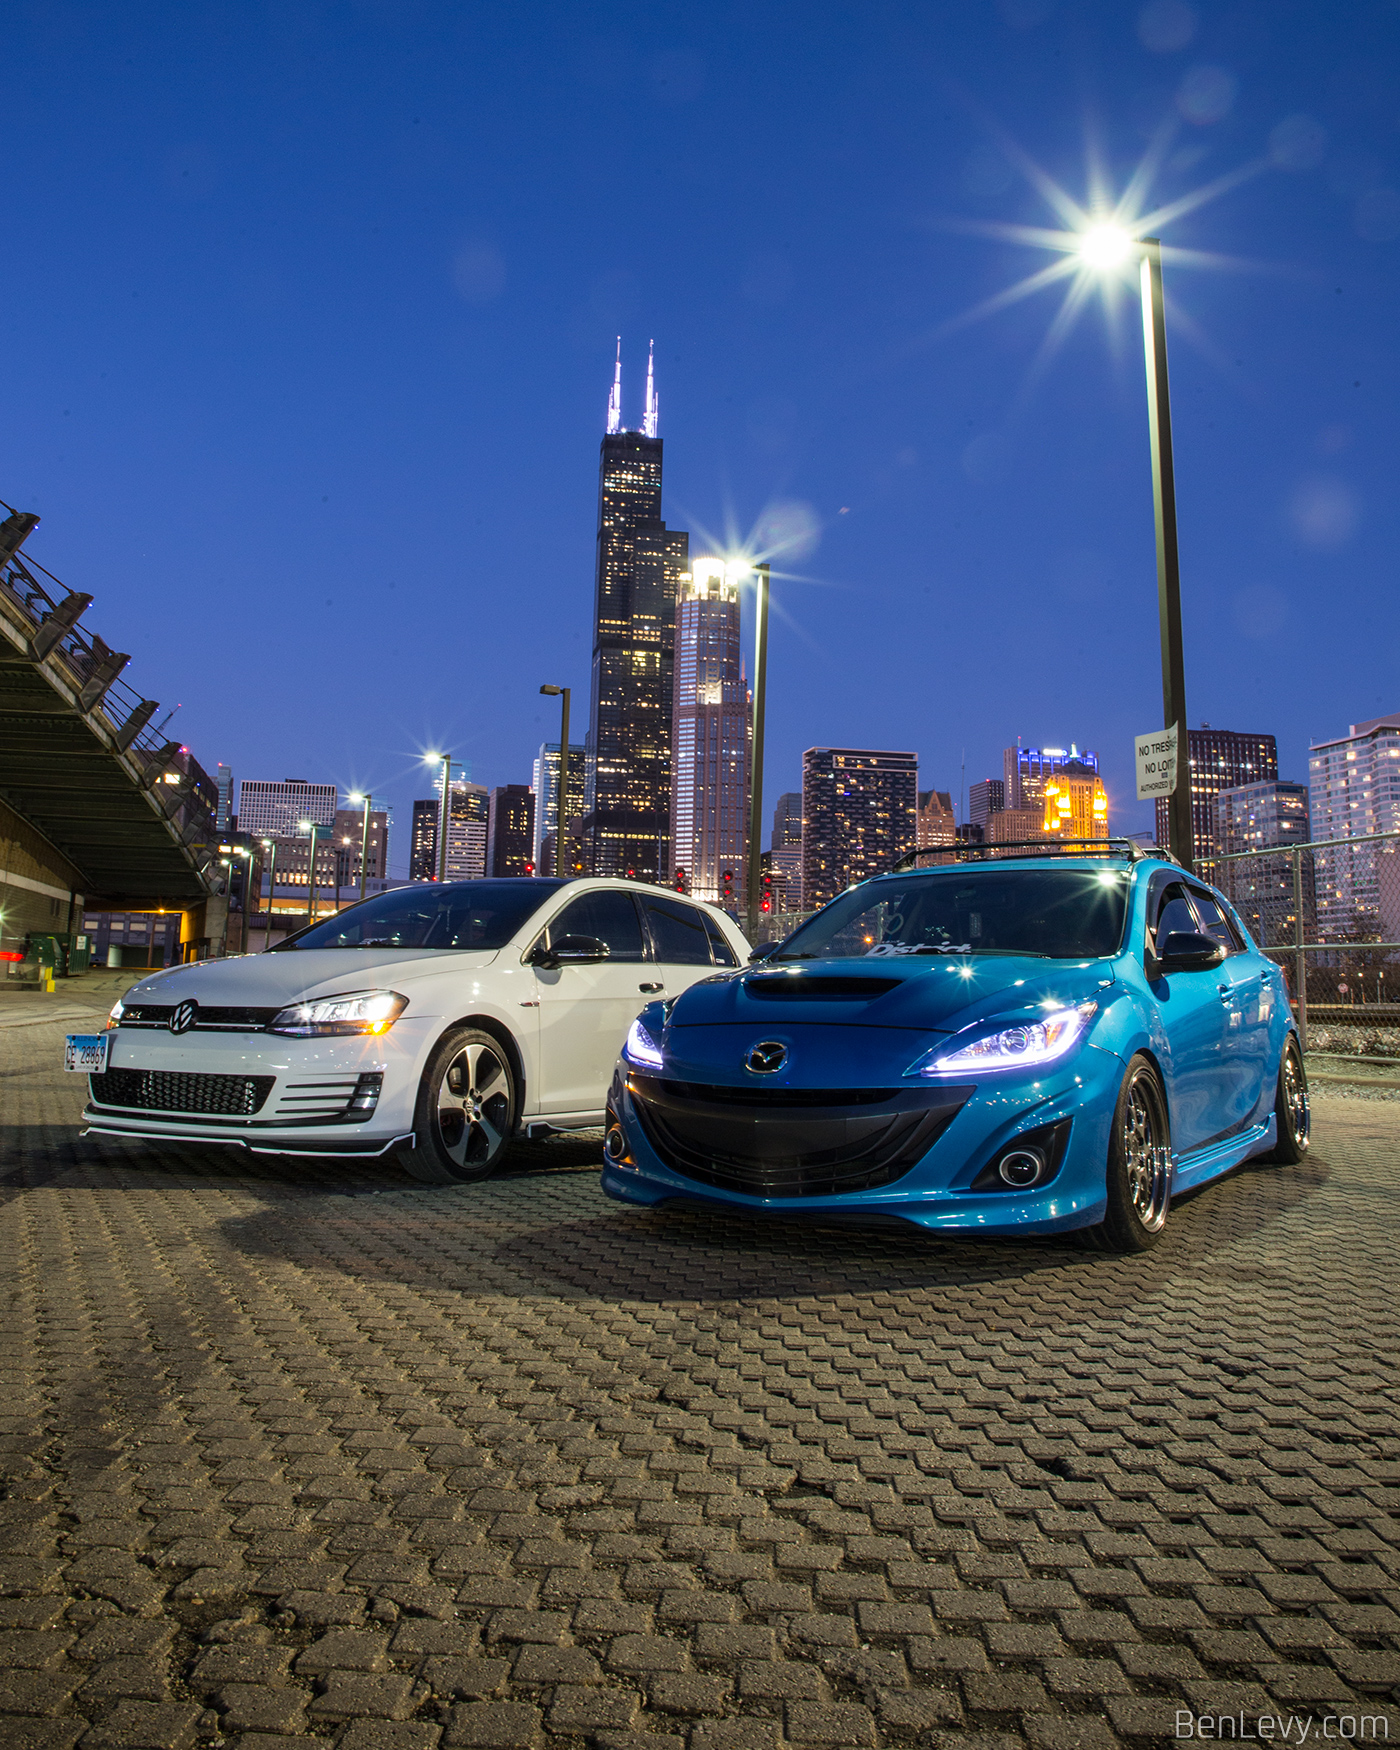 VW GTI and Mazdaspeed3 at Night